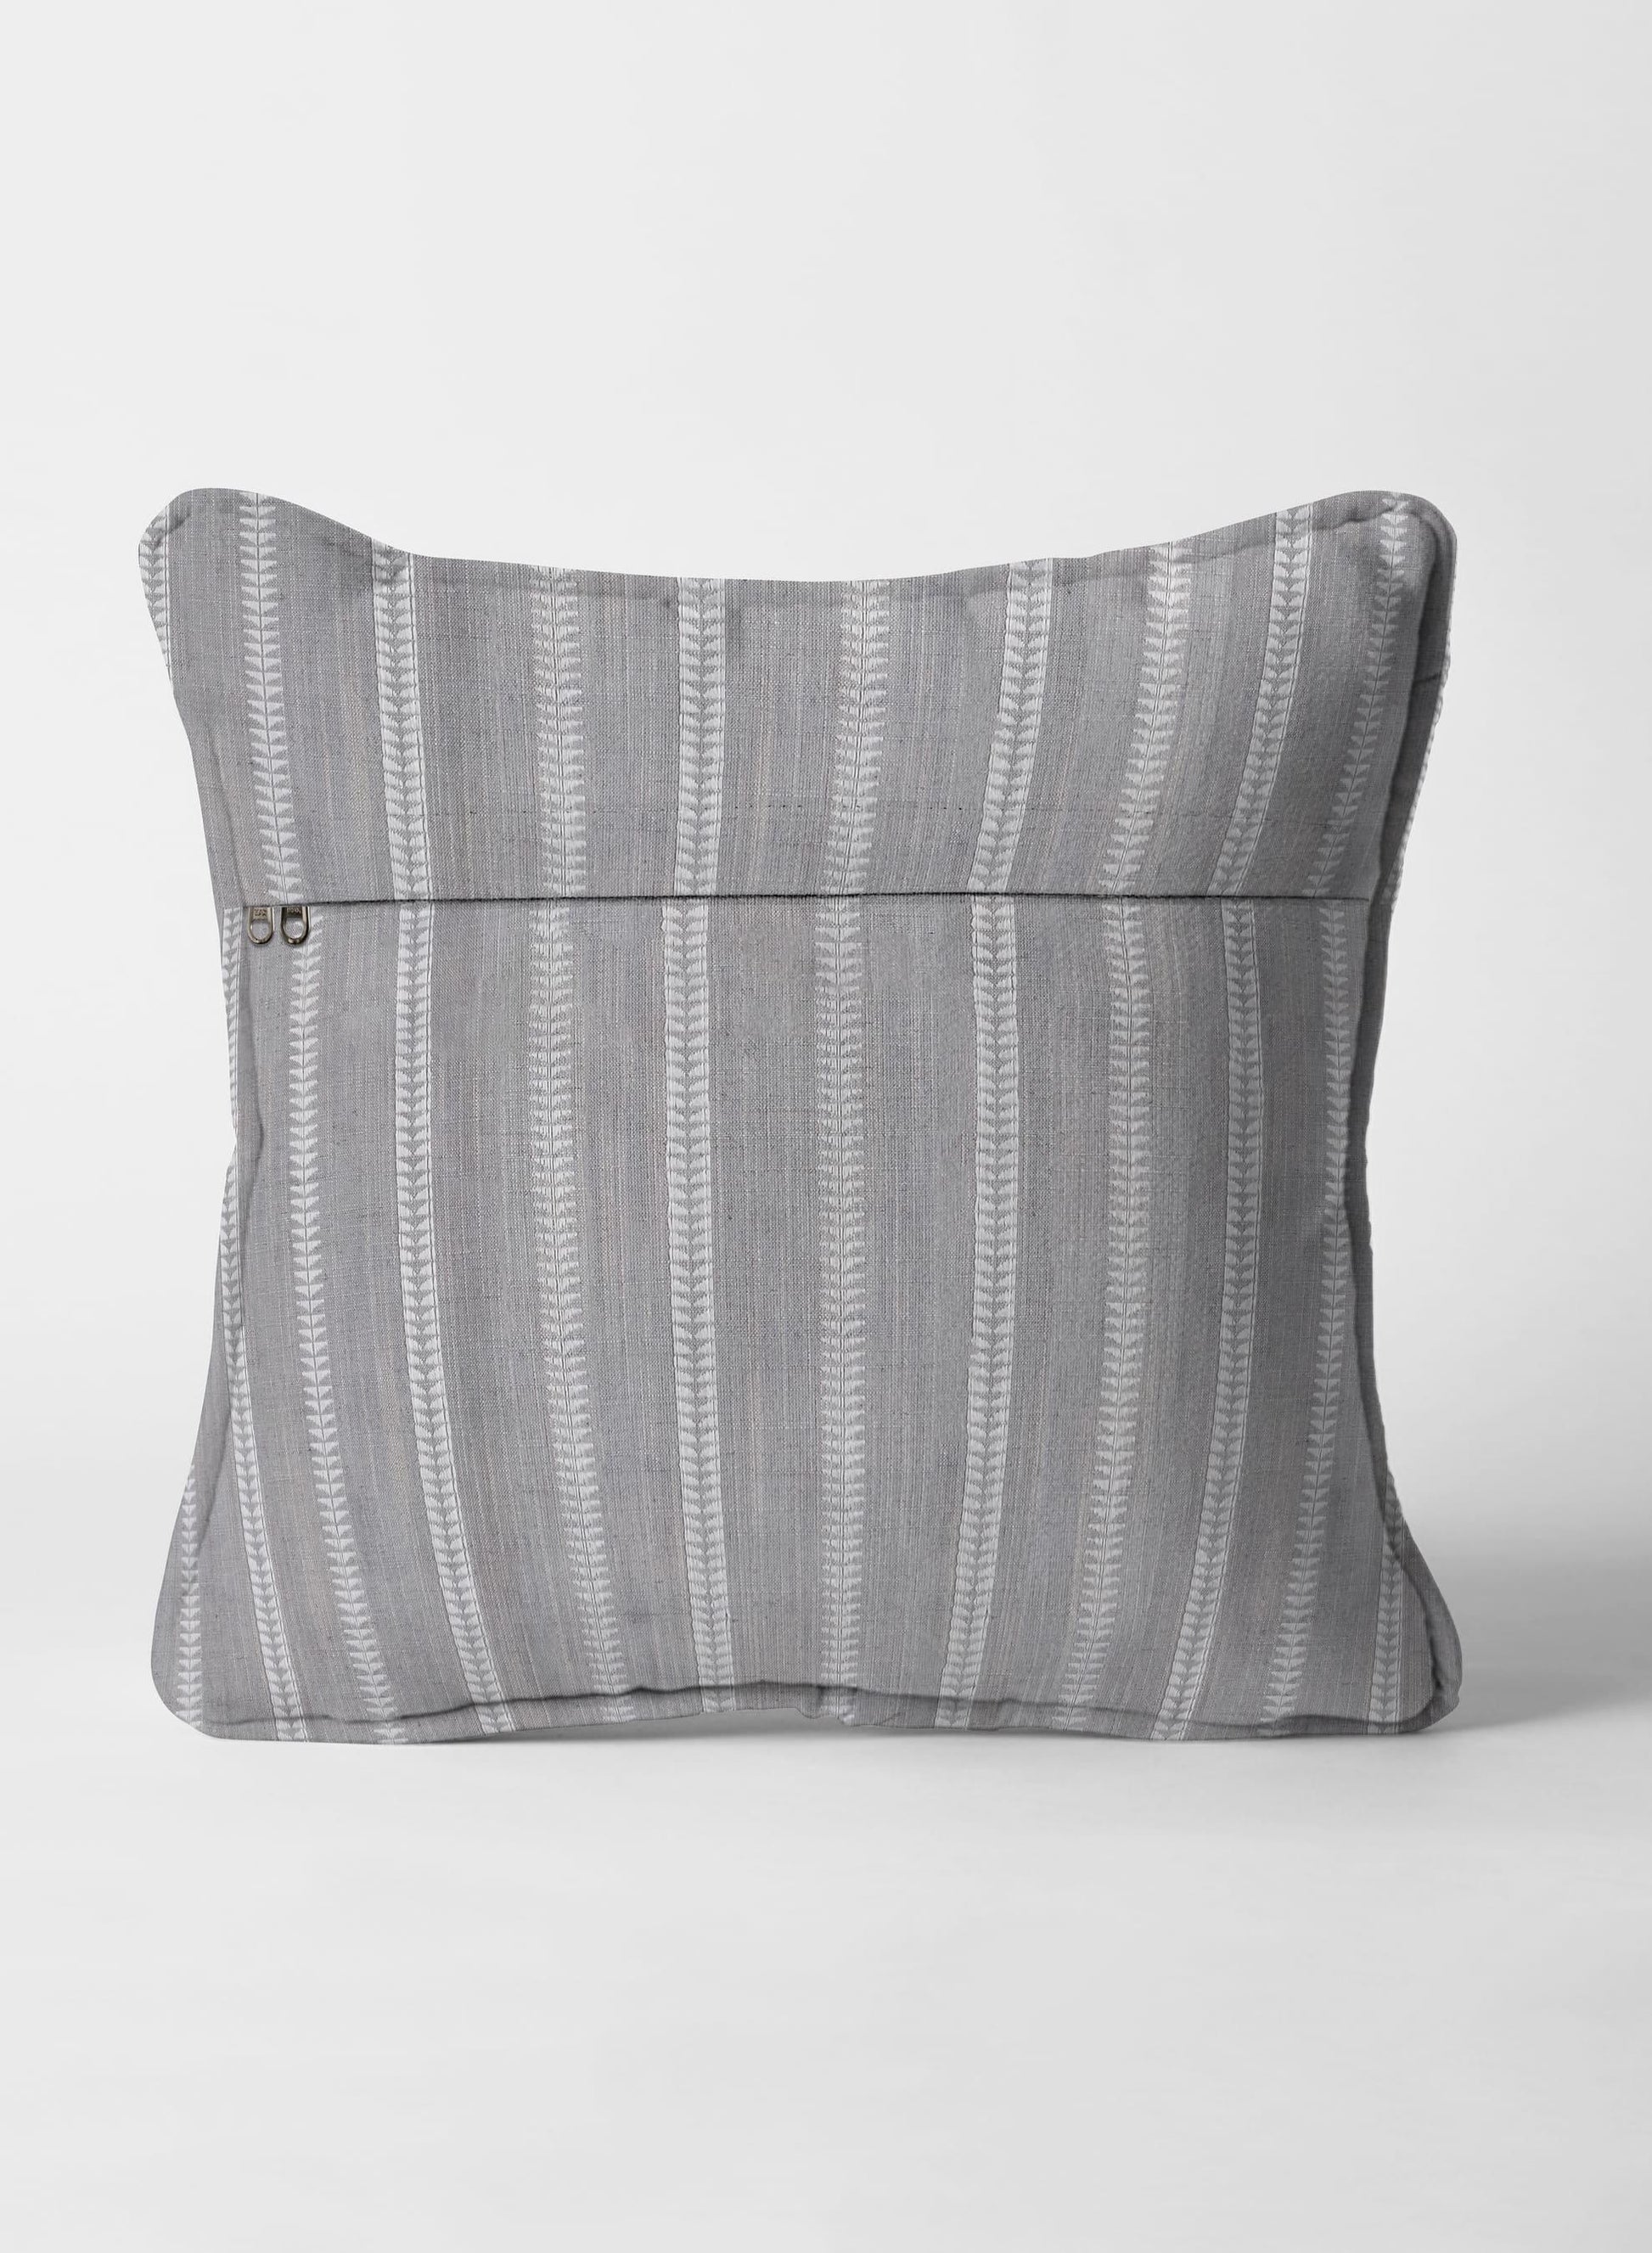 Lyon Cushion Cover | Lavender Blue - Home Crayonss